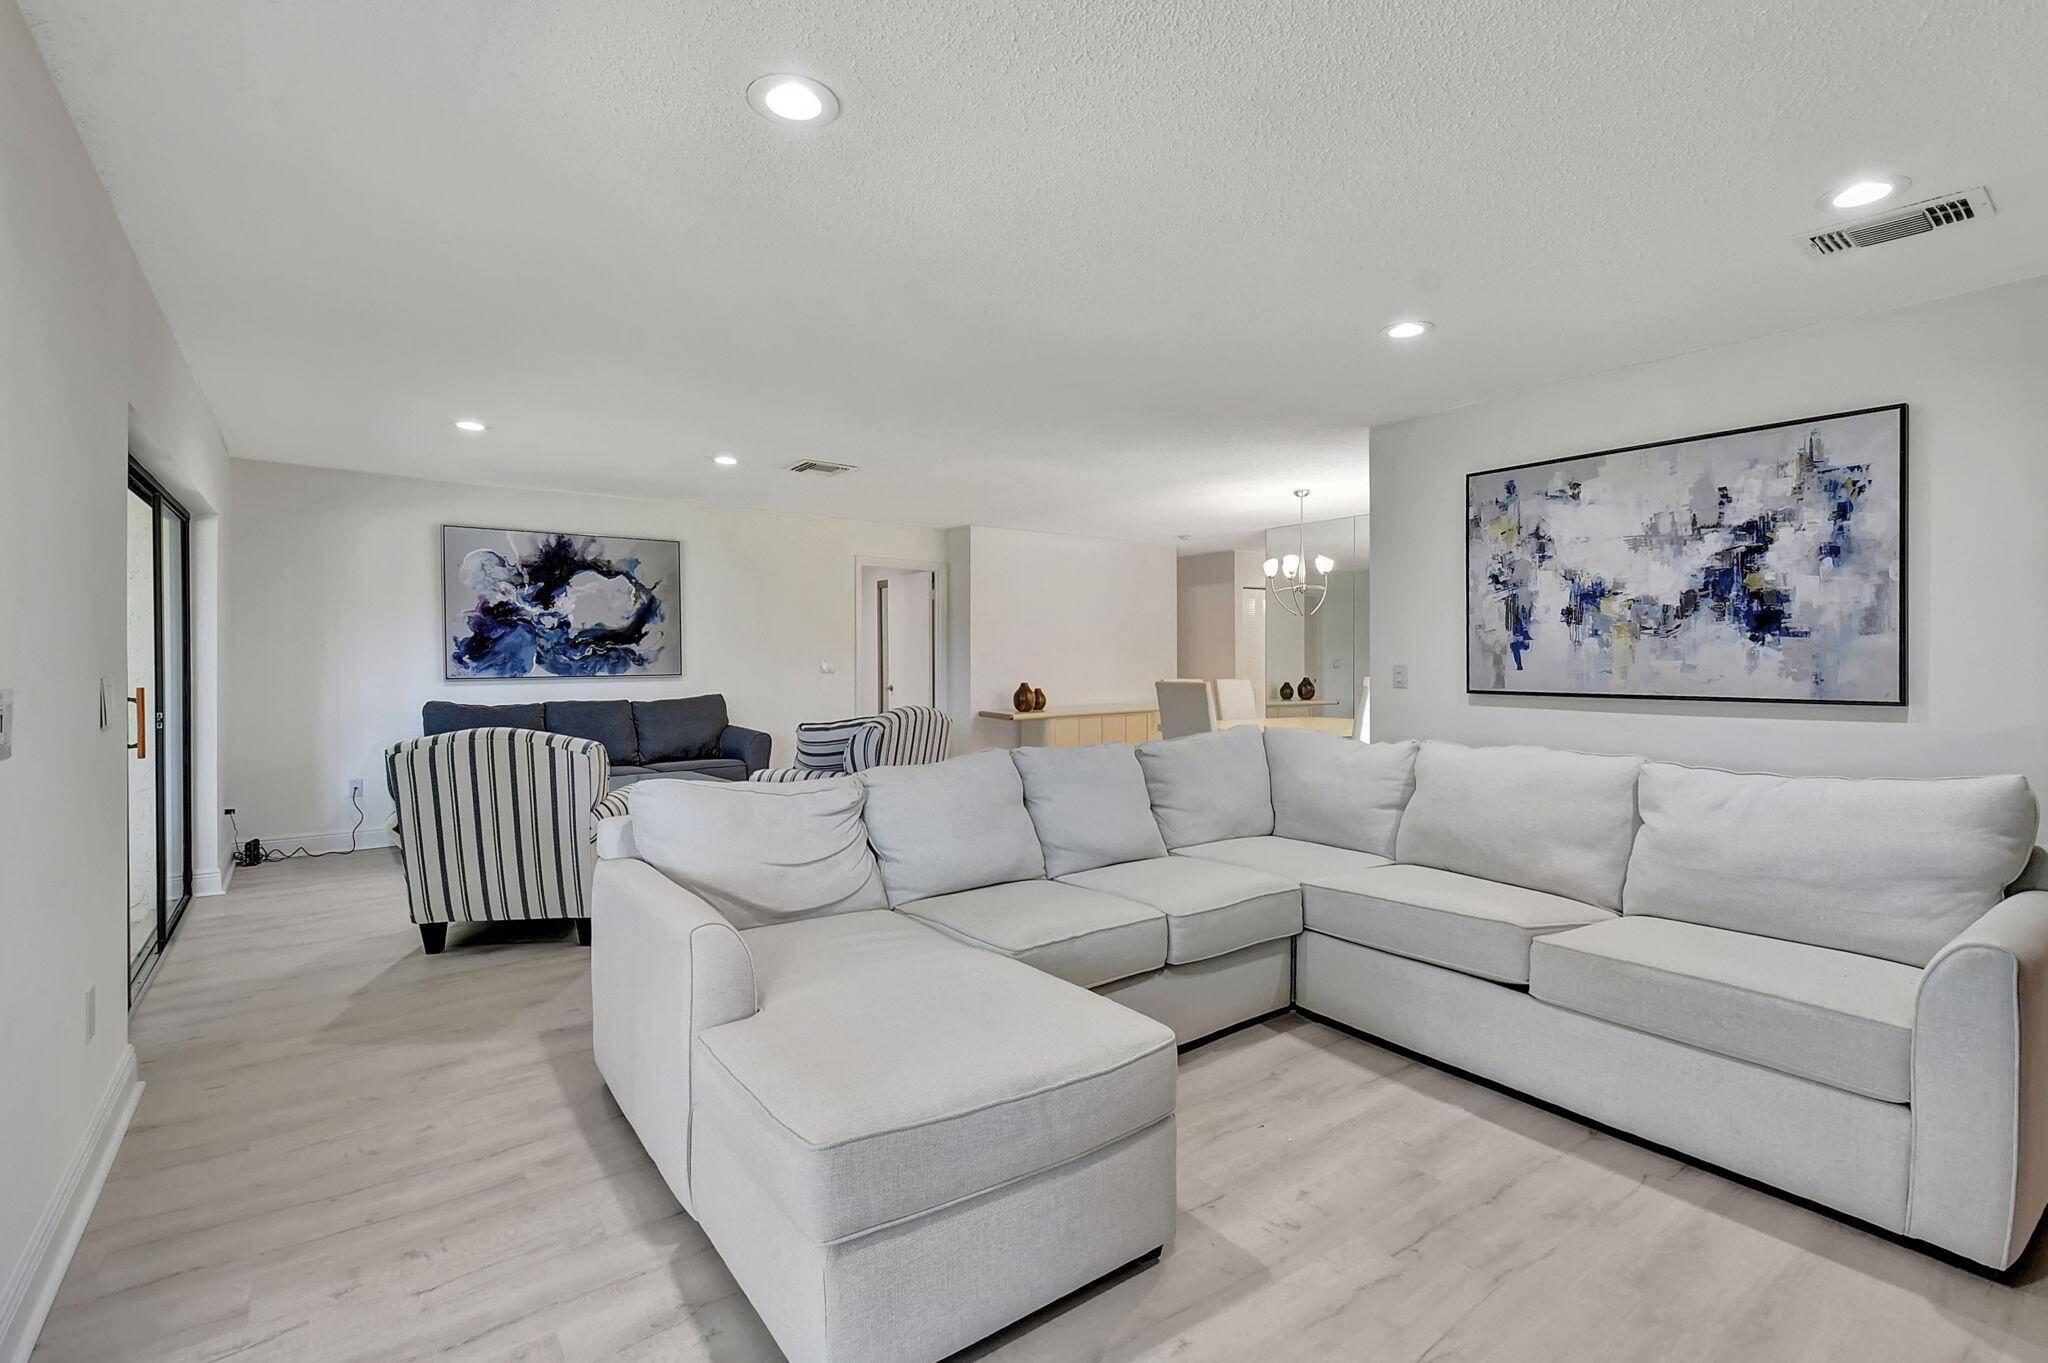 This luxurious convertible condo that can easily be converted to 3 bedrooms is a must see.